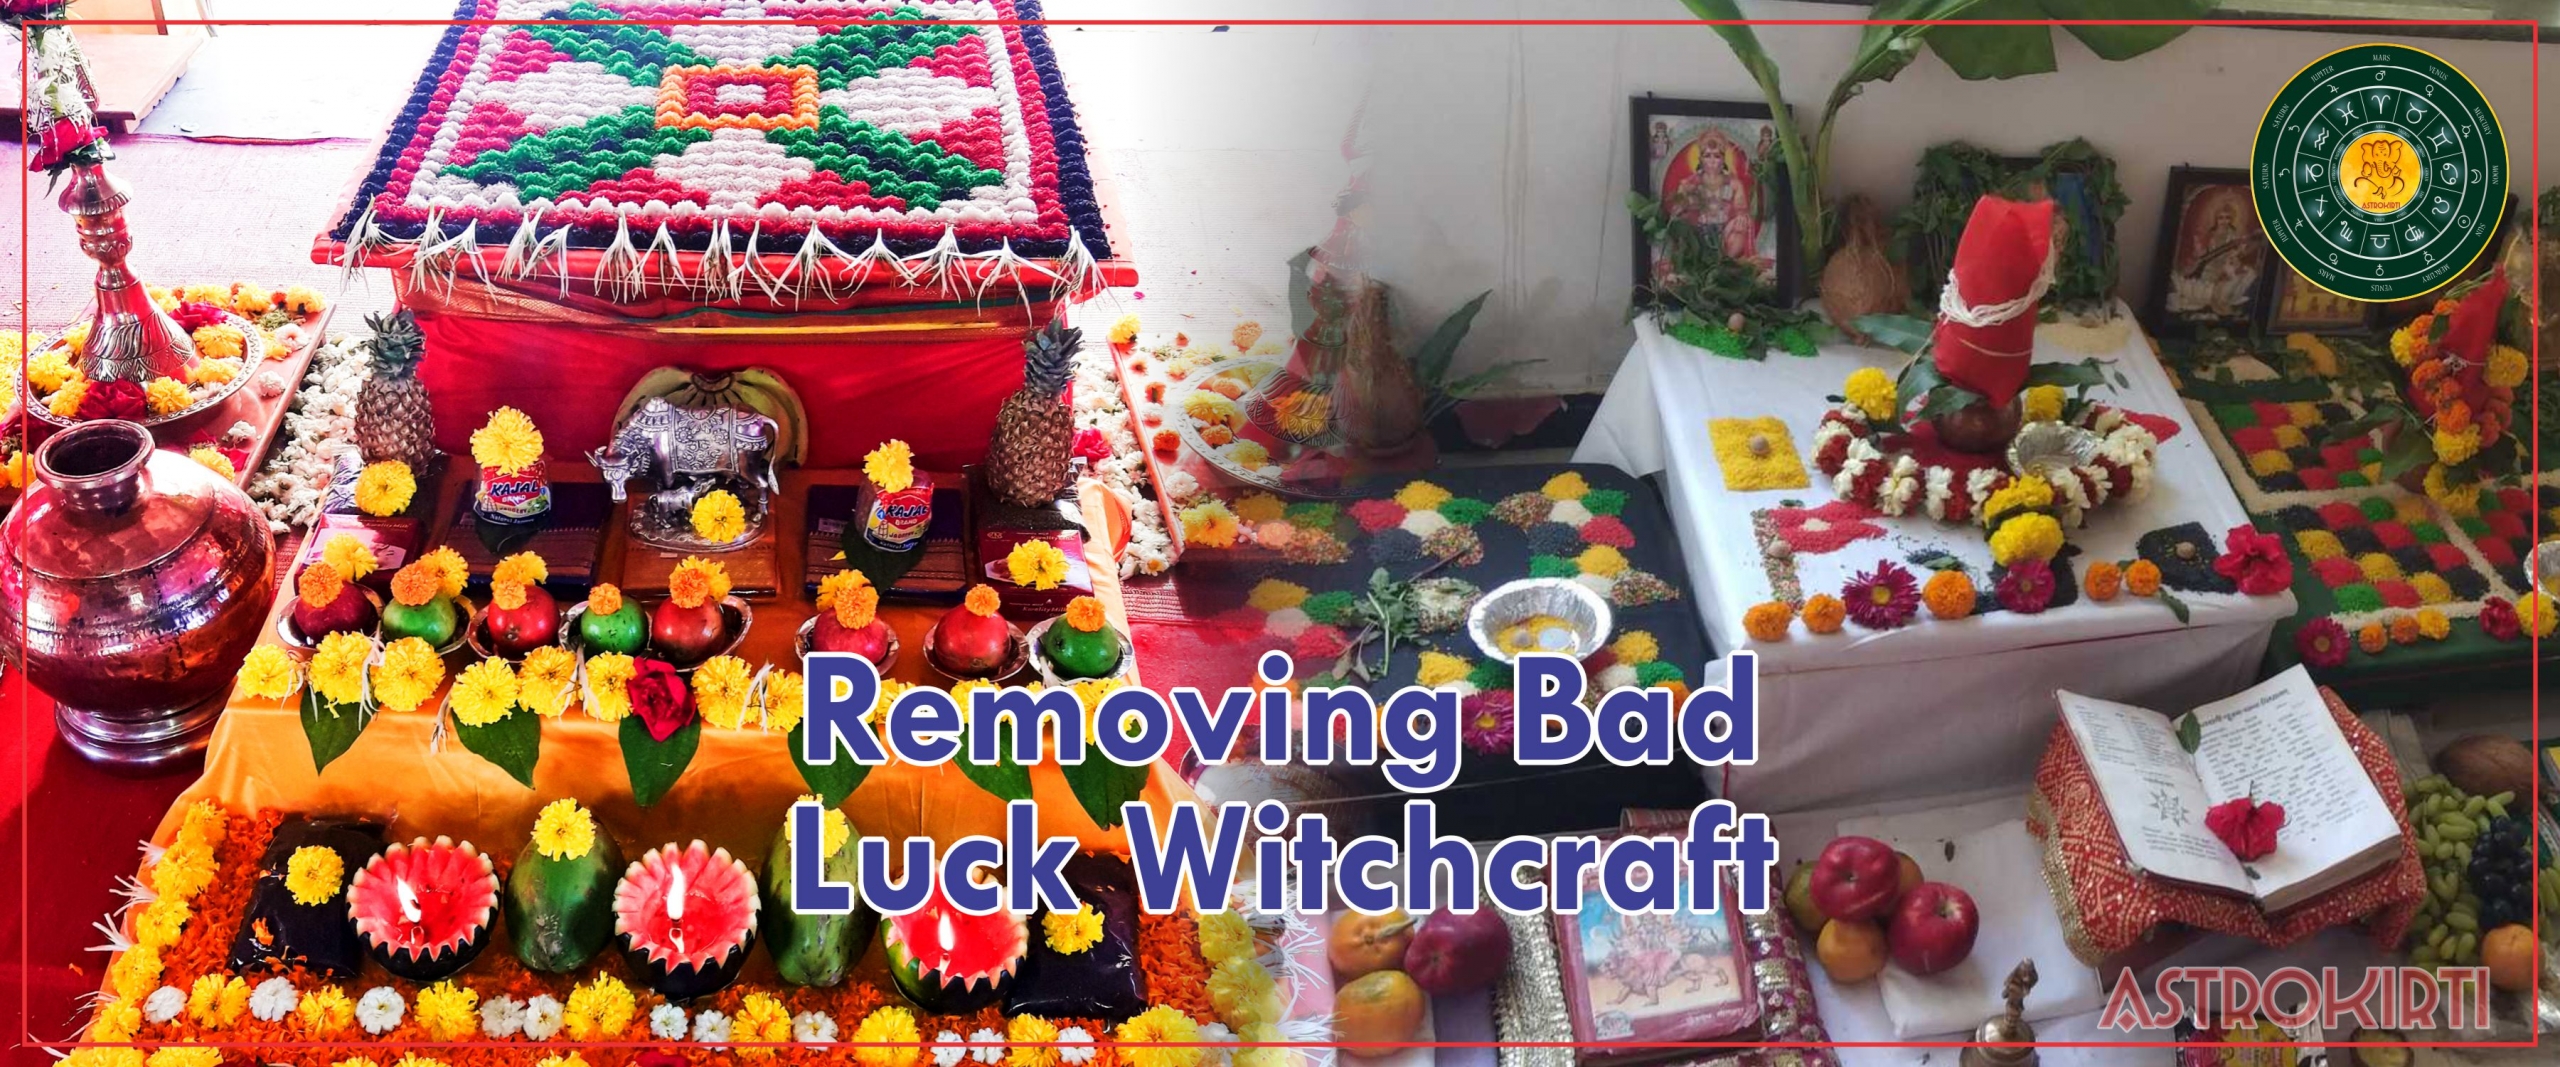 Removing Bad Luck Witchcraft